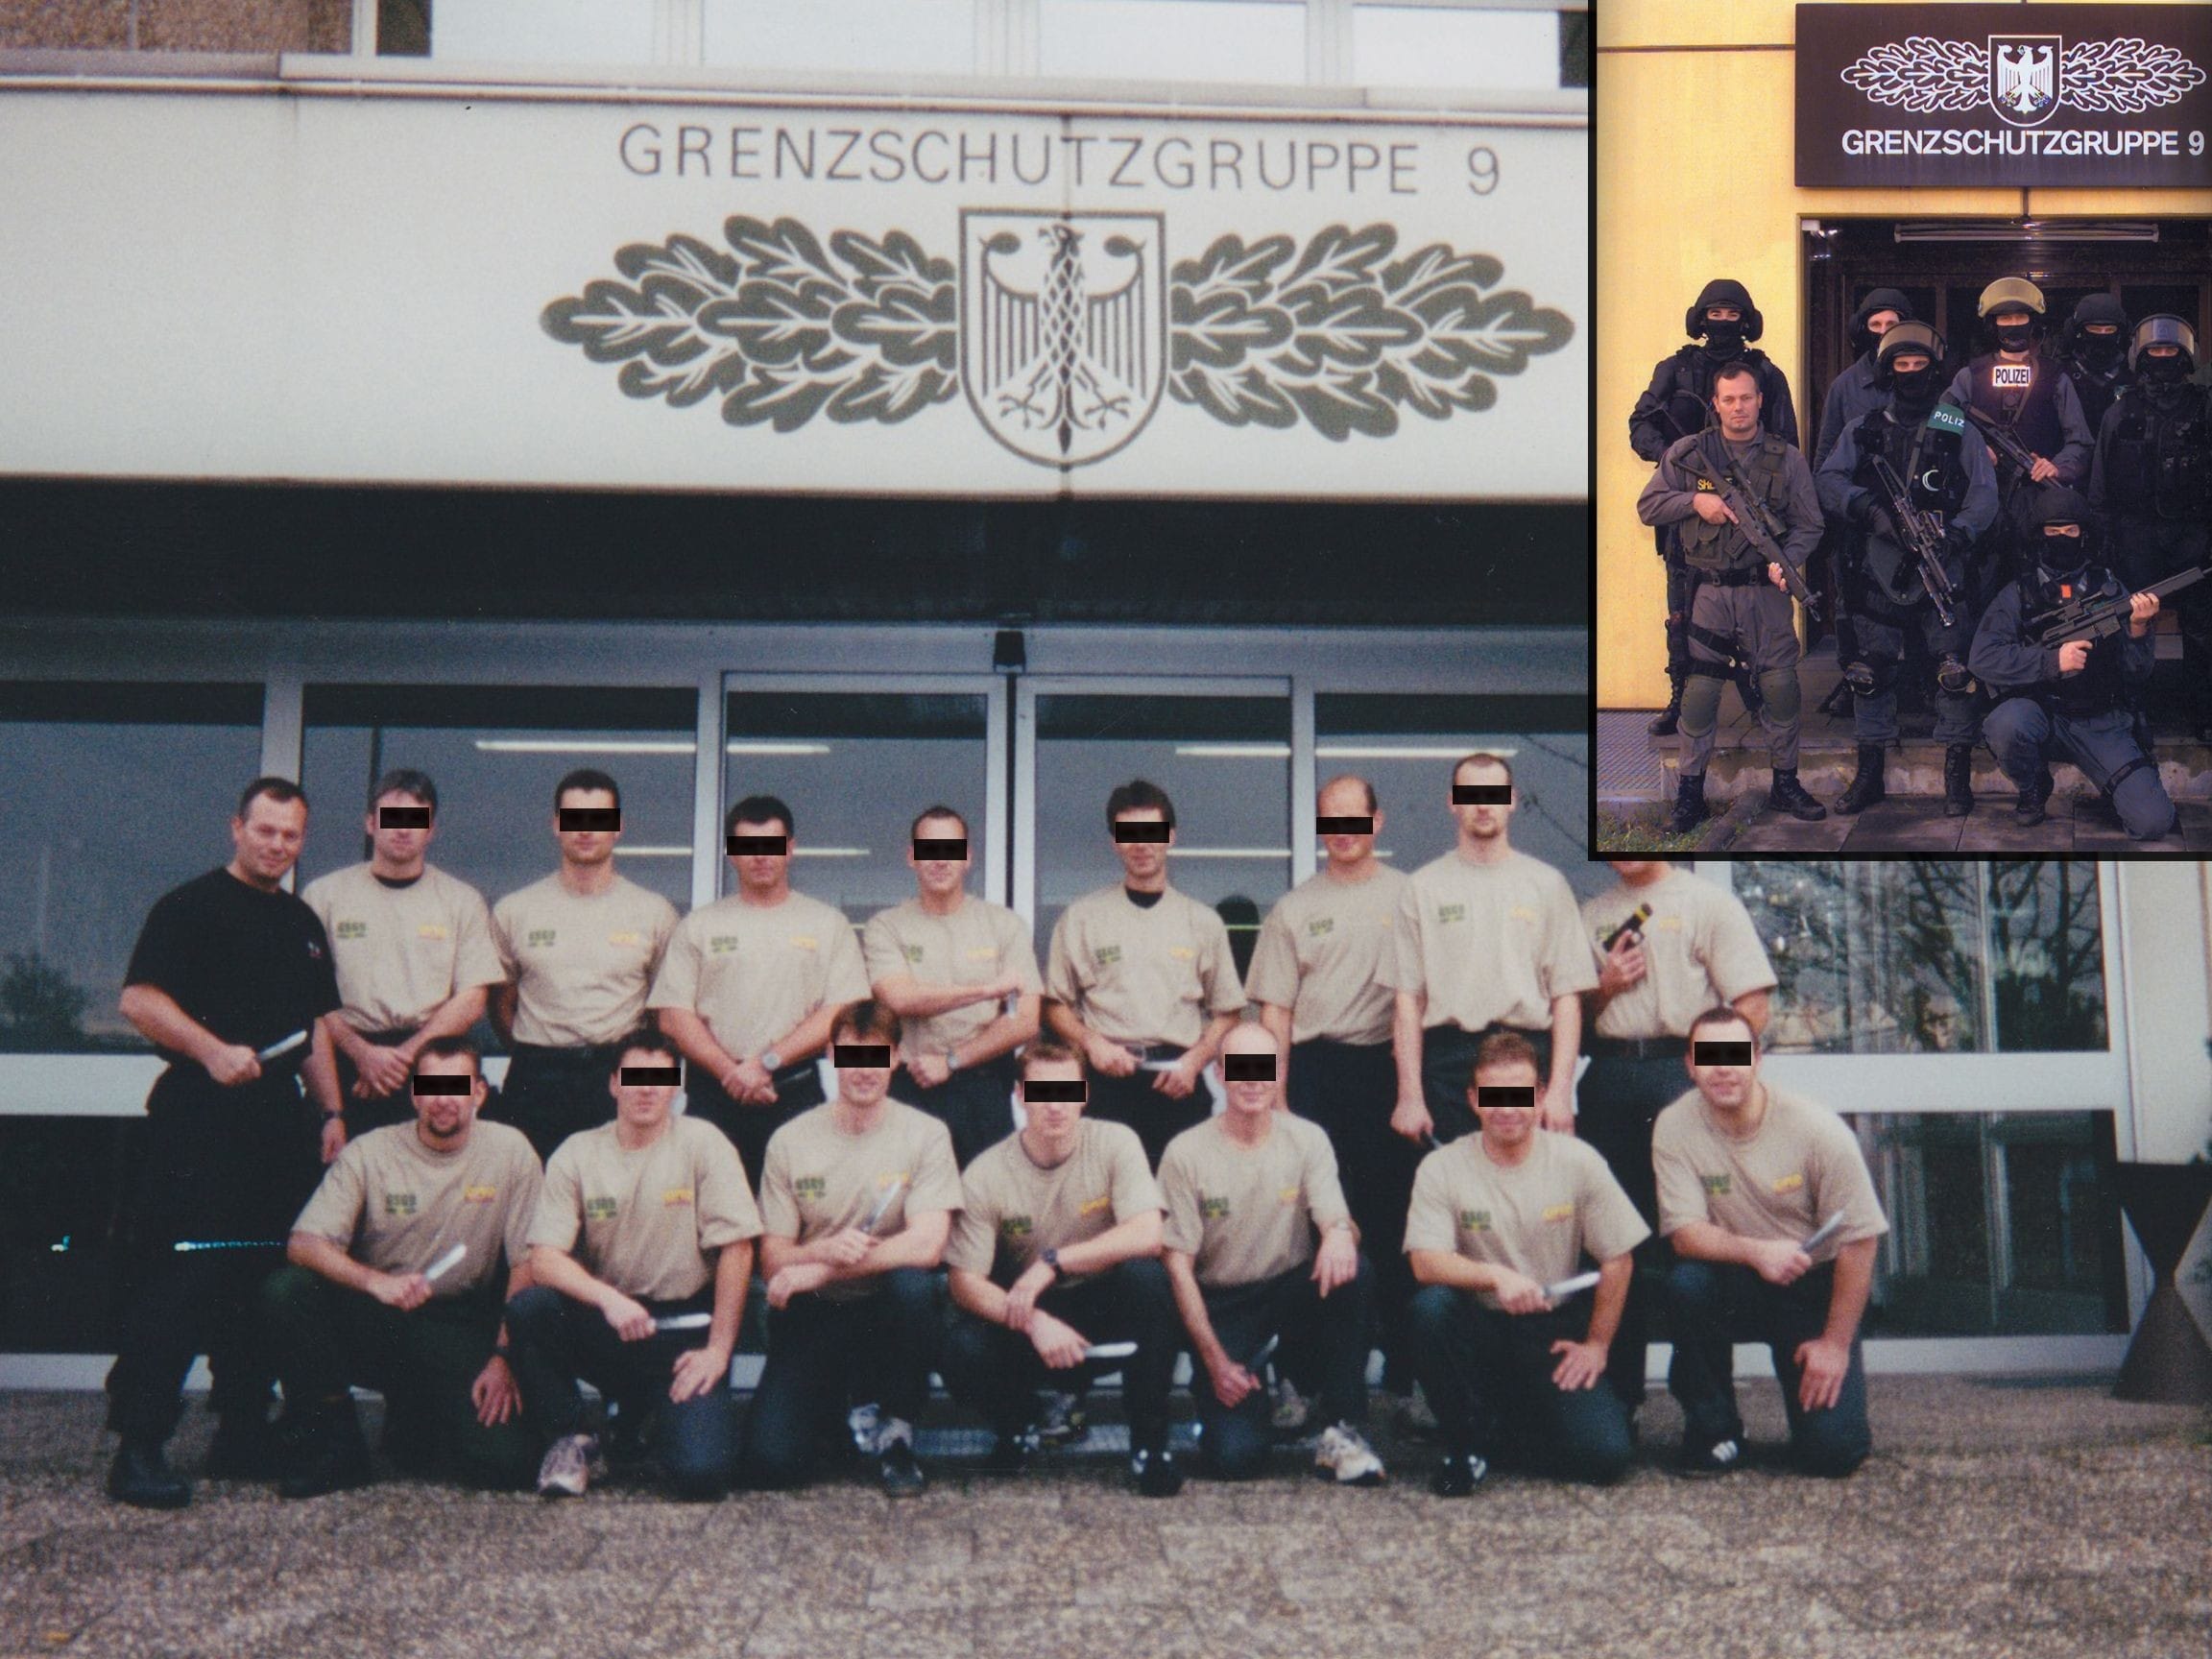 The first foreign counterterrorist team Jim taught was German GSG9. He worked a few times with them, and they recommended him to other agencies and units.